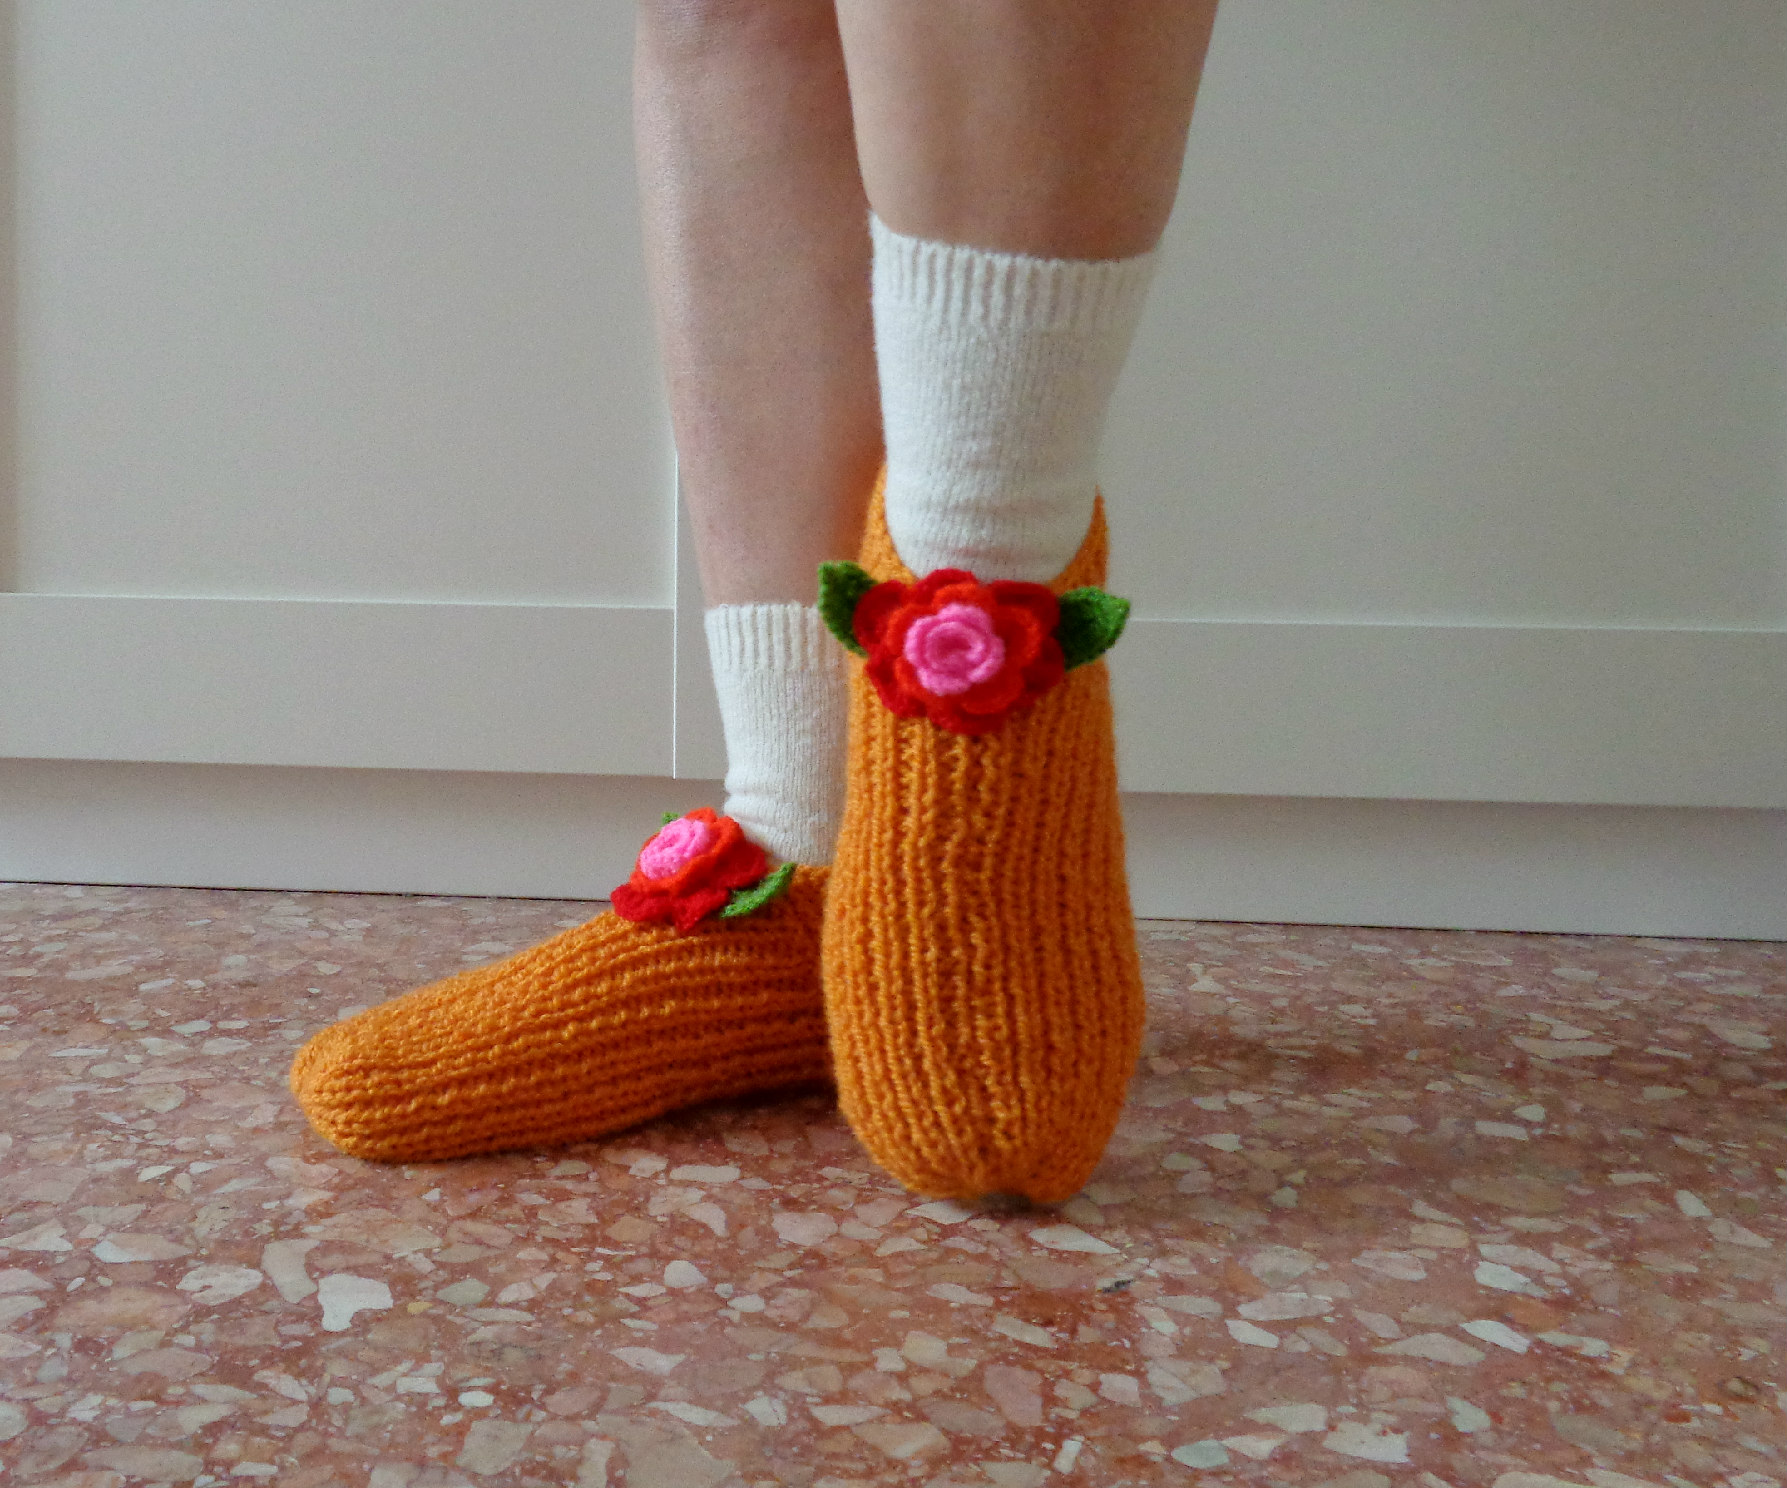 yellow knitting slippers shoes with crochet flowers free pattern by Lilia Vanini Liliacraftparty